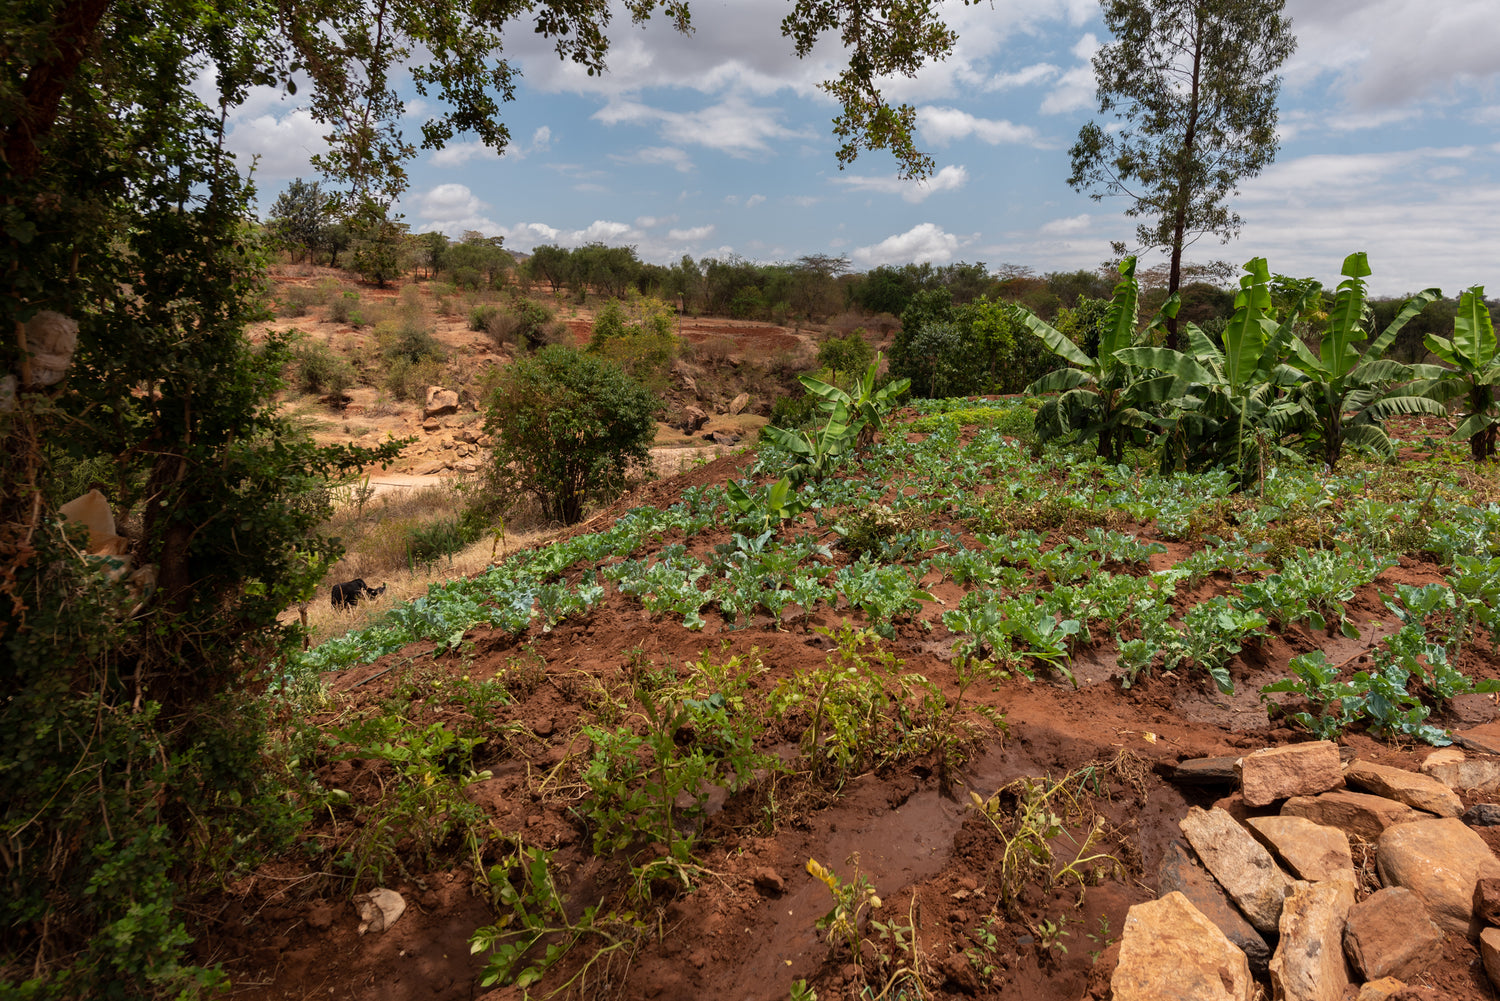 Climate change challenges the food security of small-holder farmers in Makueni